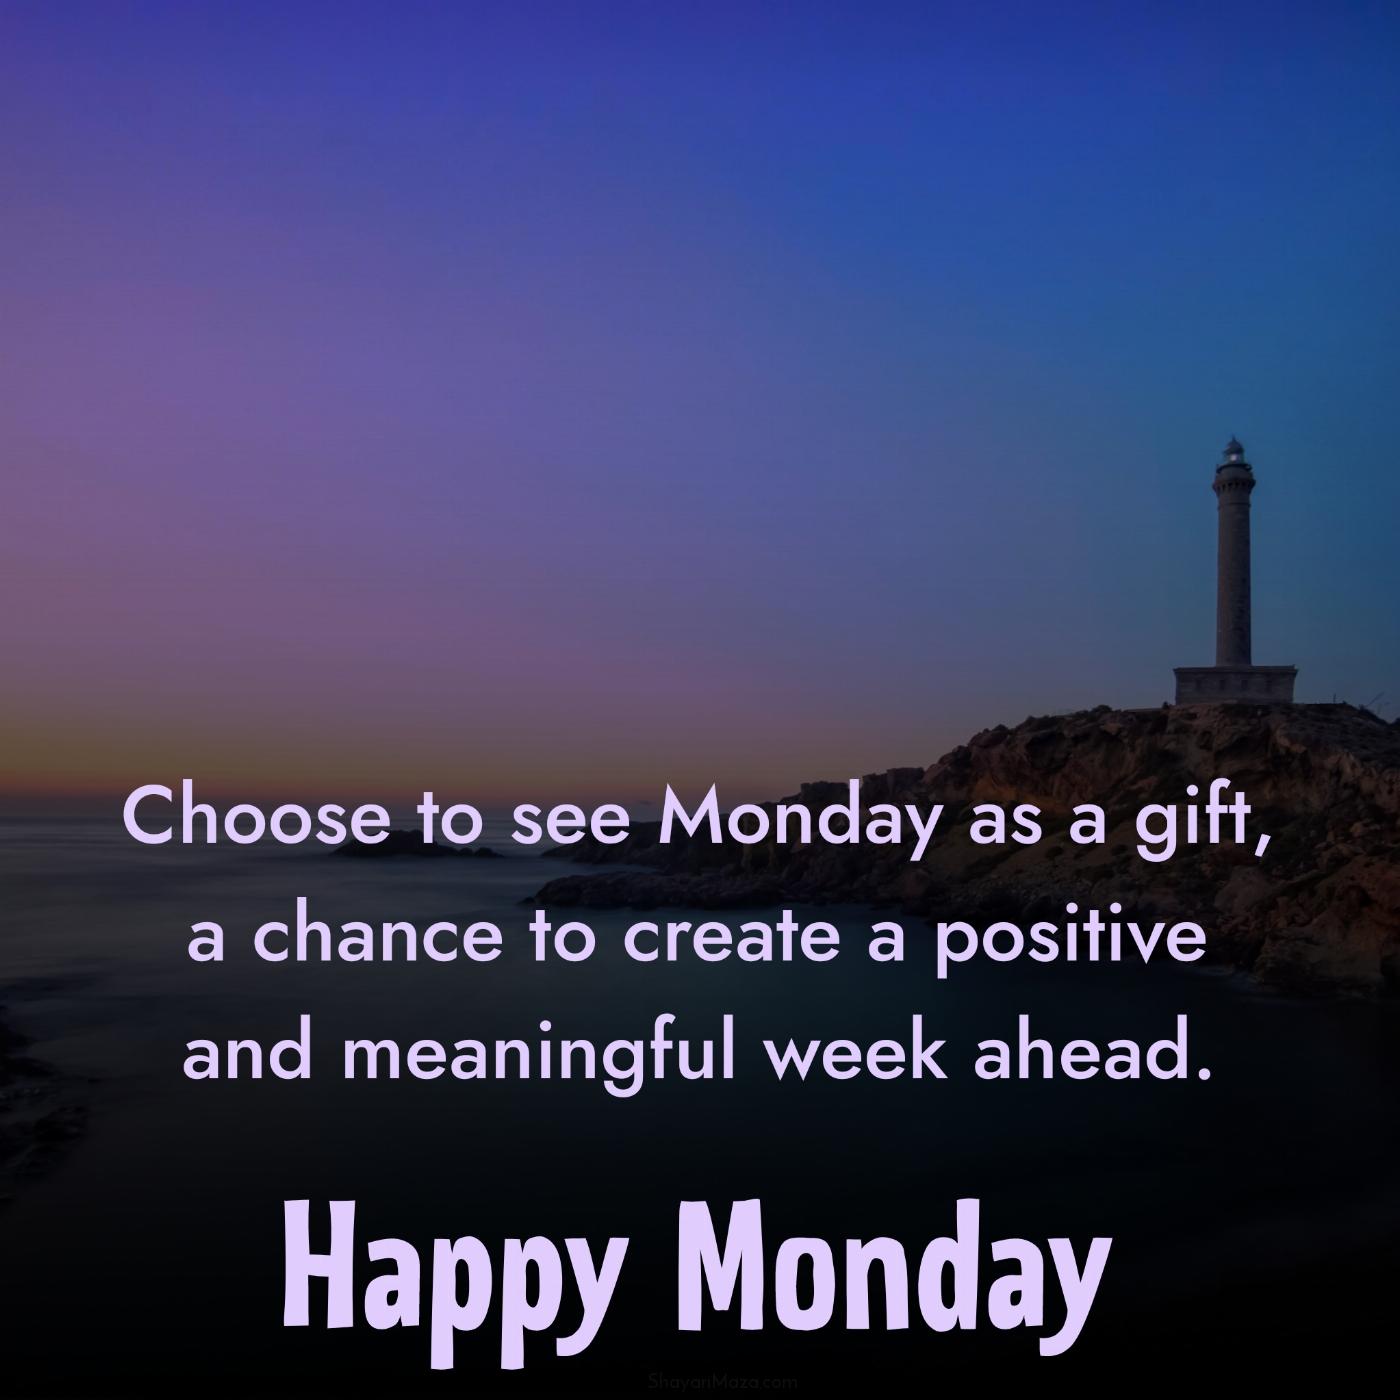 Choose to see Monday as a gift a chance to create a positive